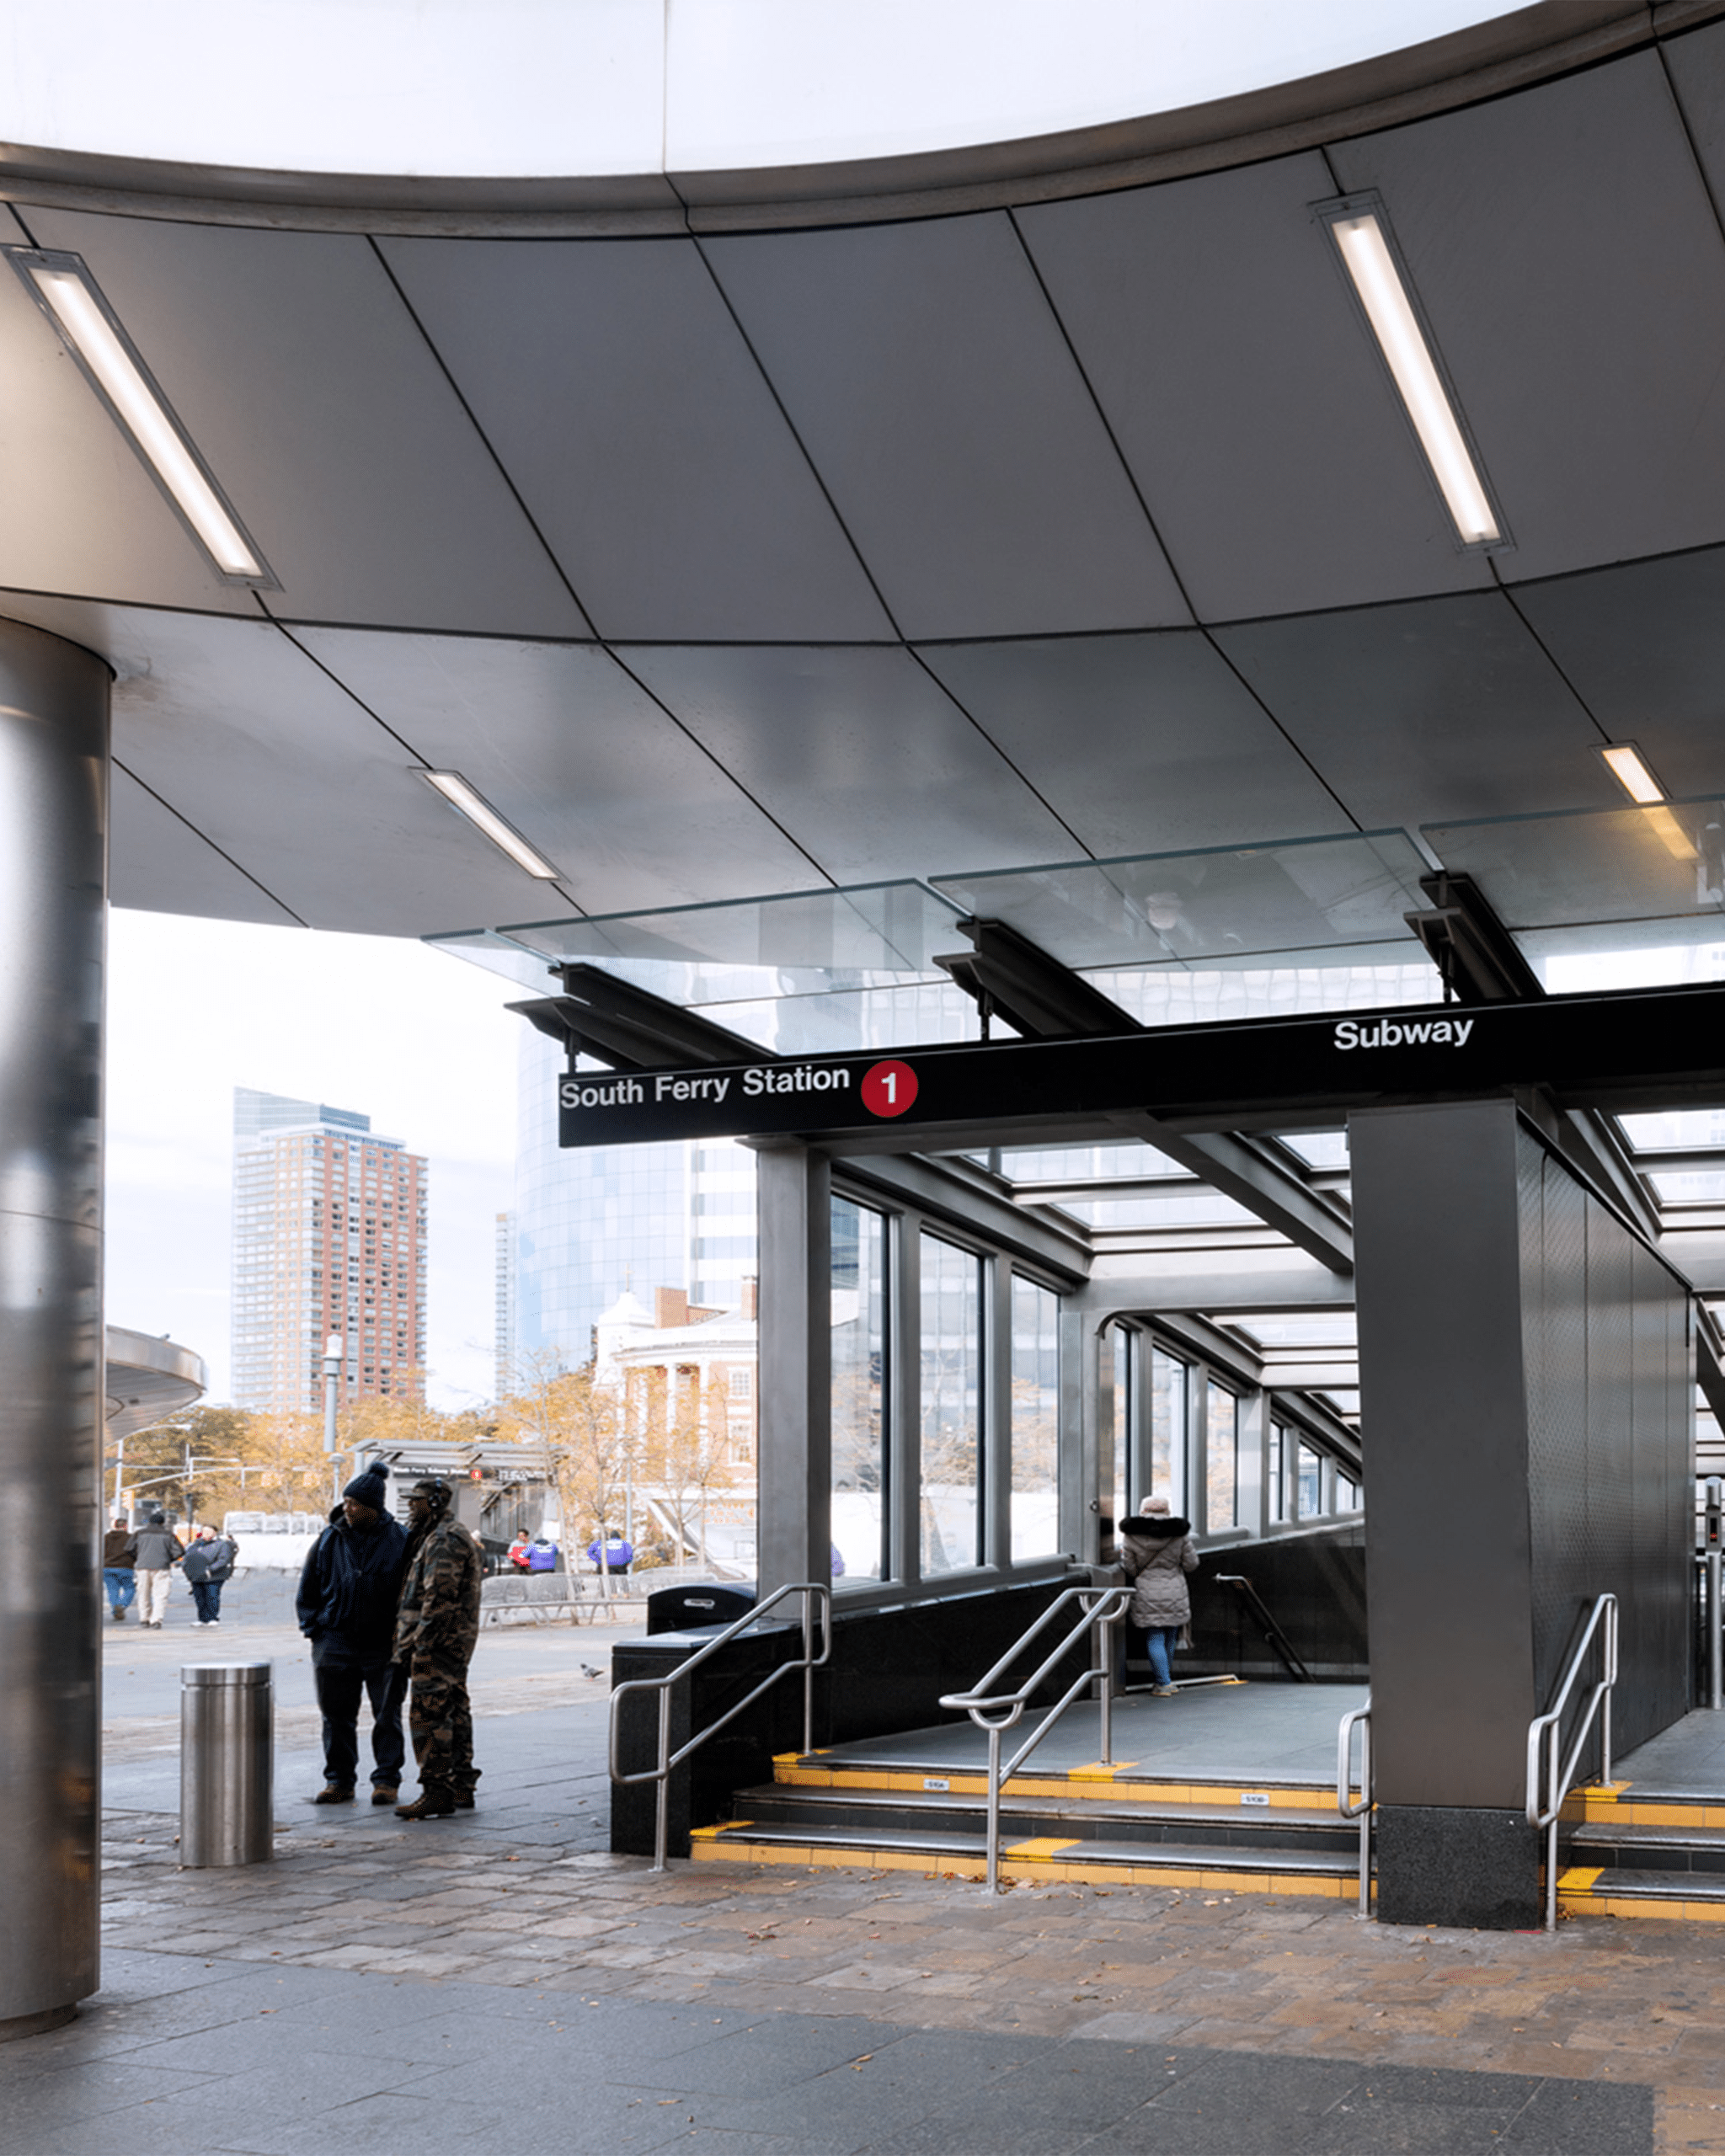 South Ferry Station entrance